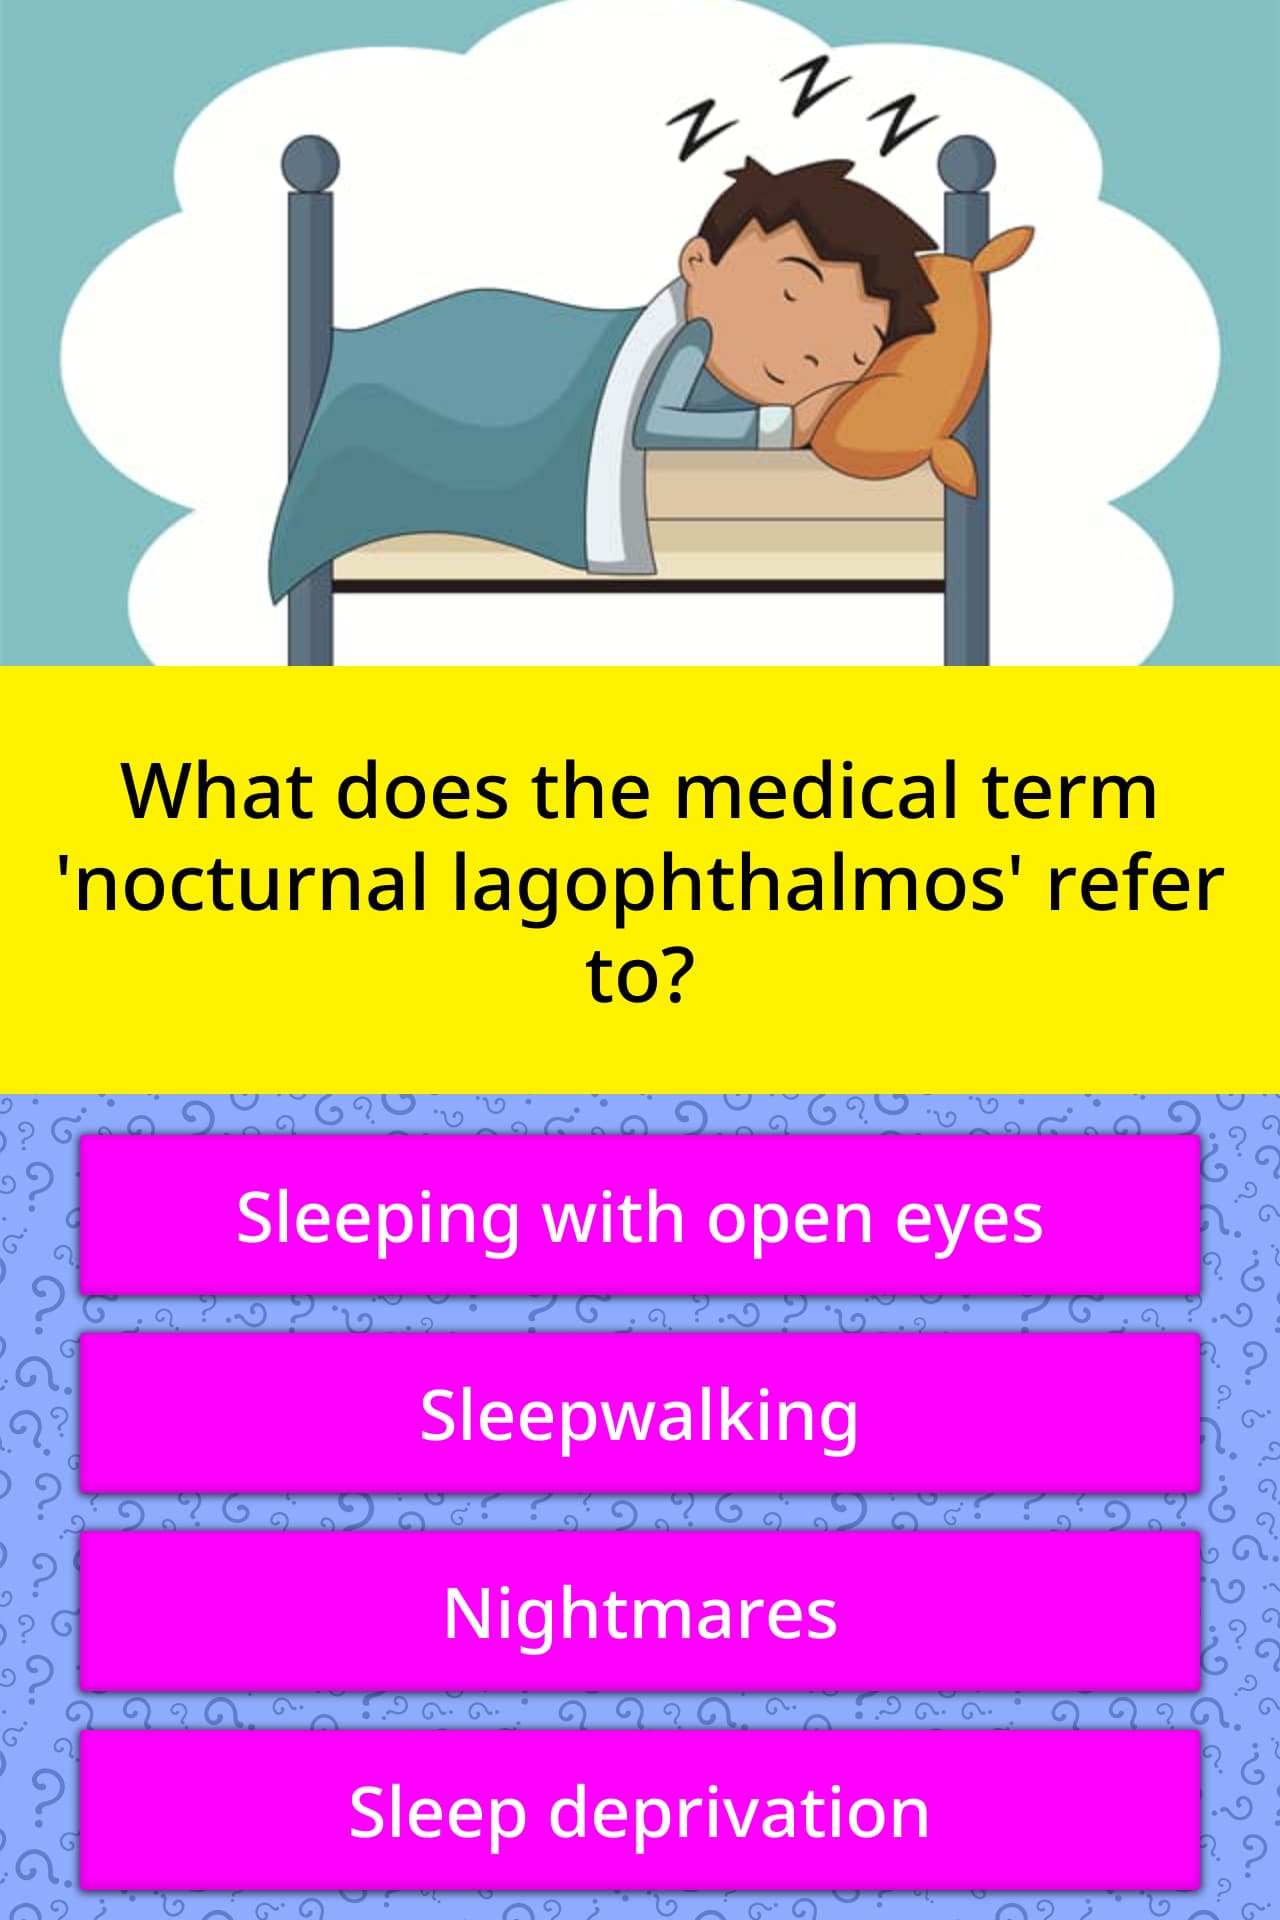 nocturnal lagophthalmos